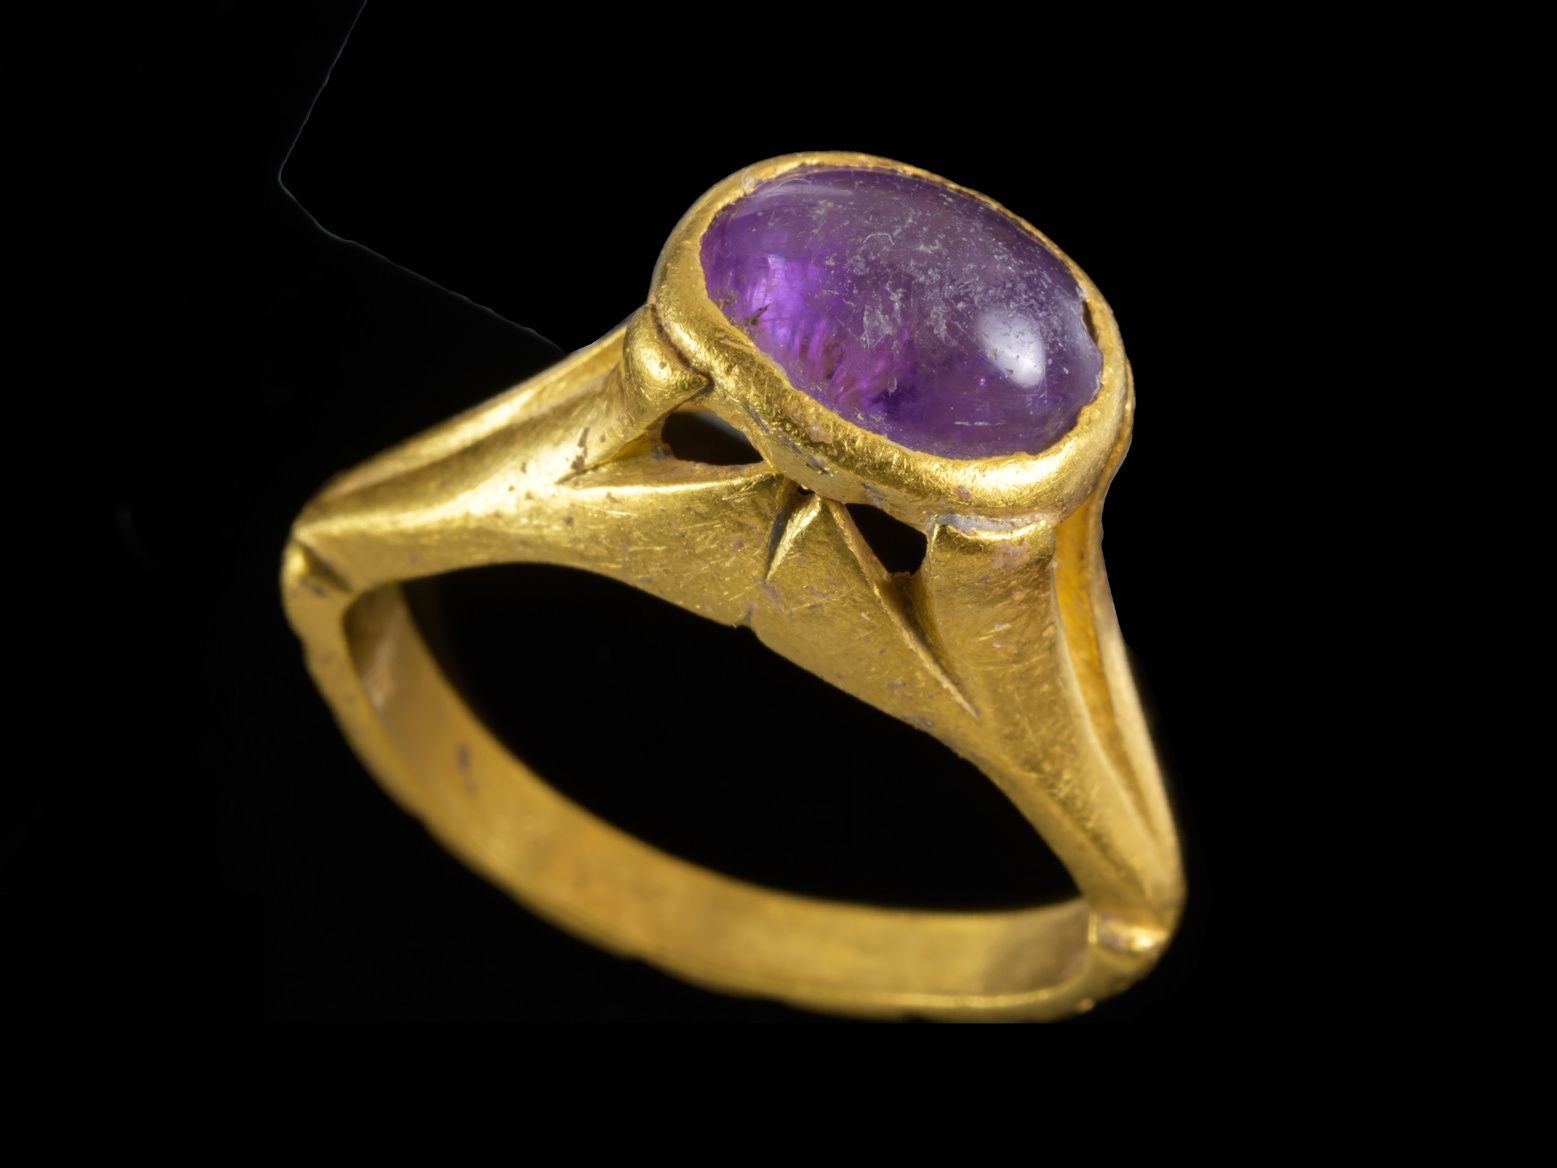 This ancient amethyst ring may have been used to help ward off hangovers